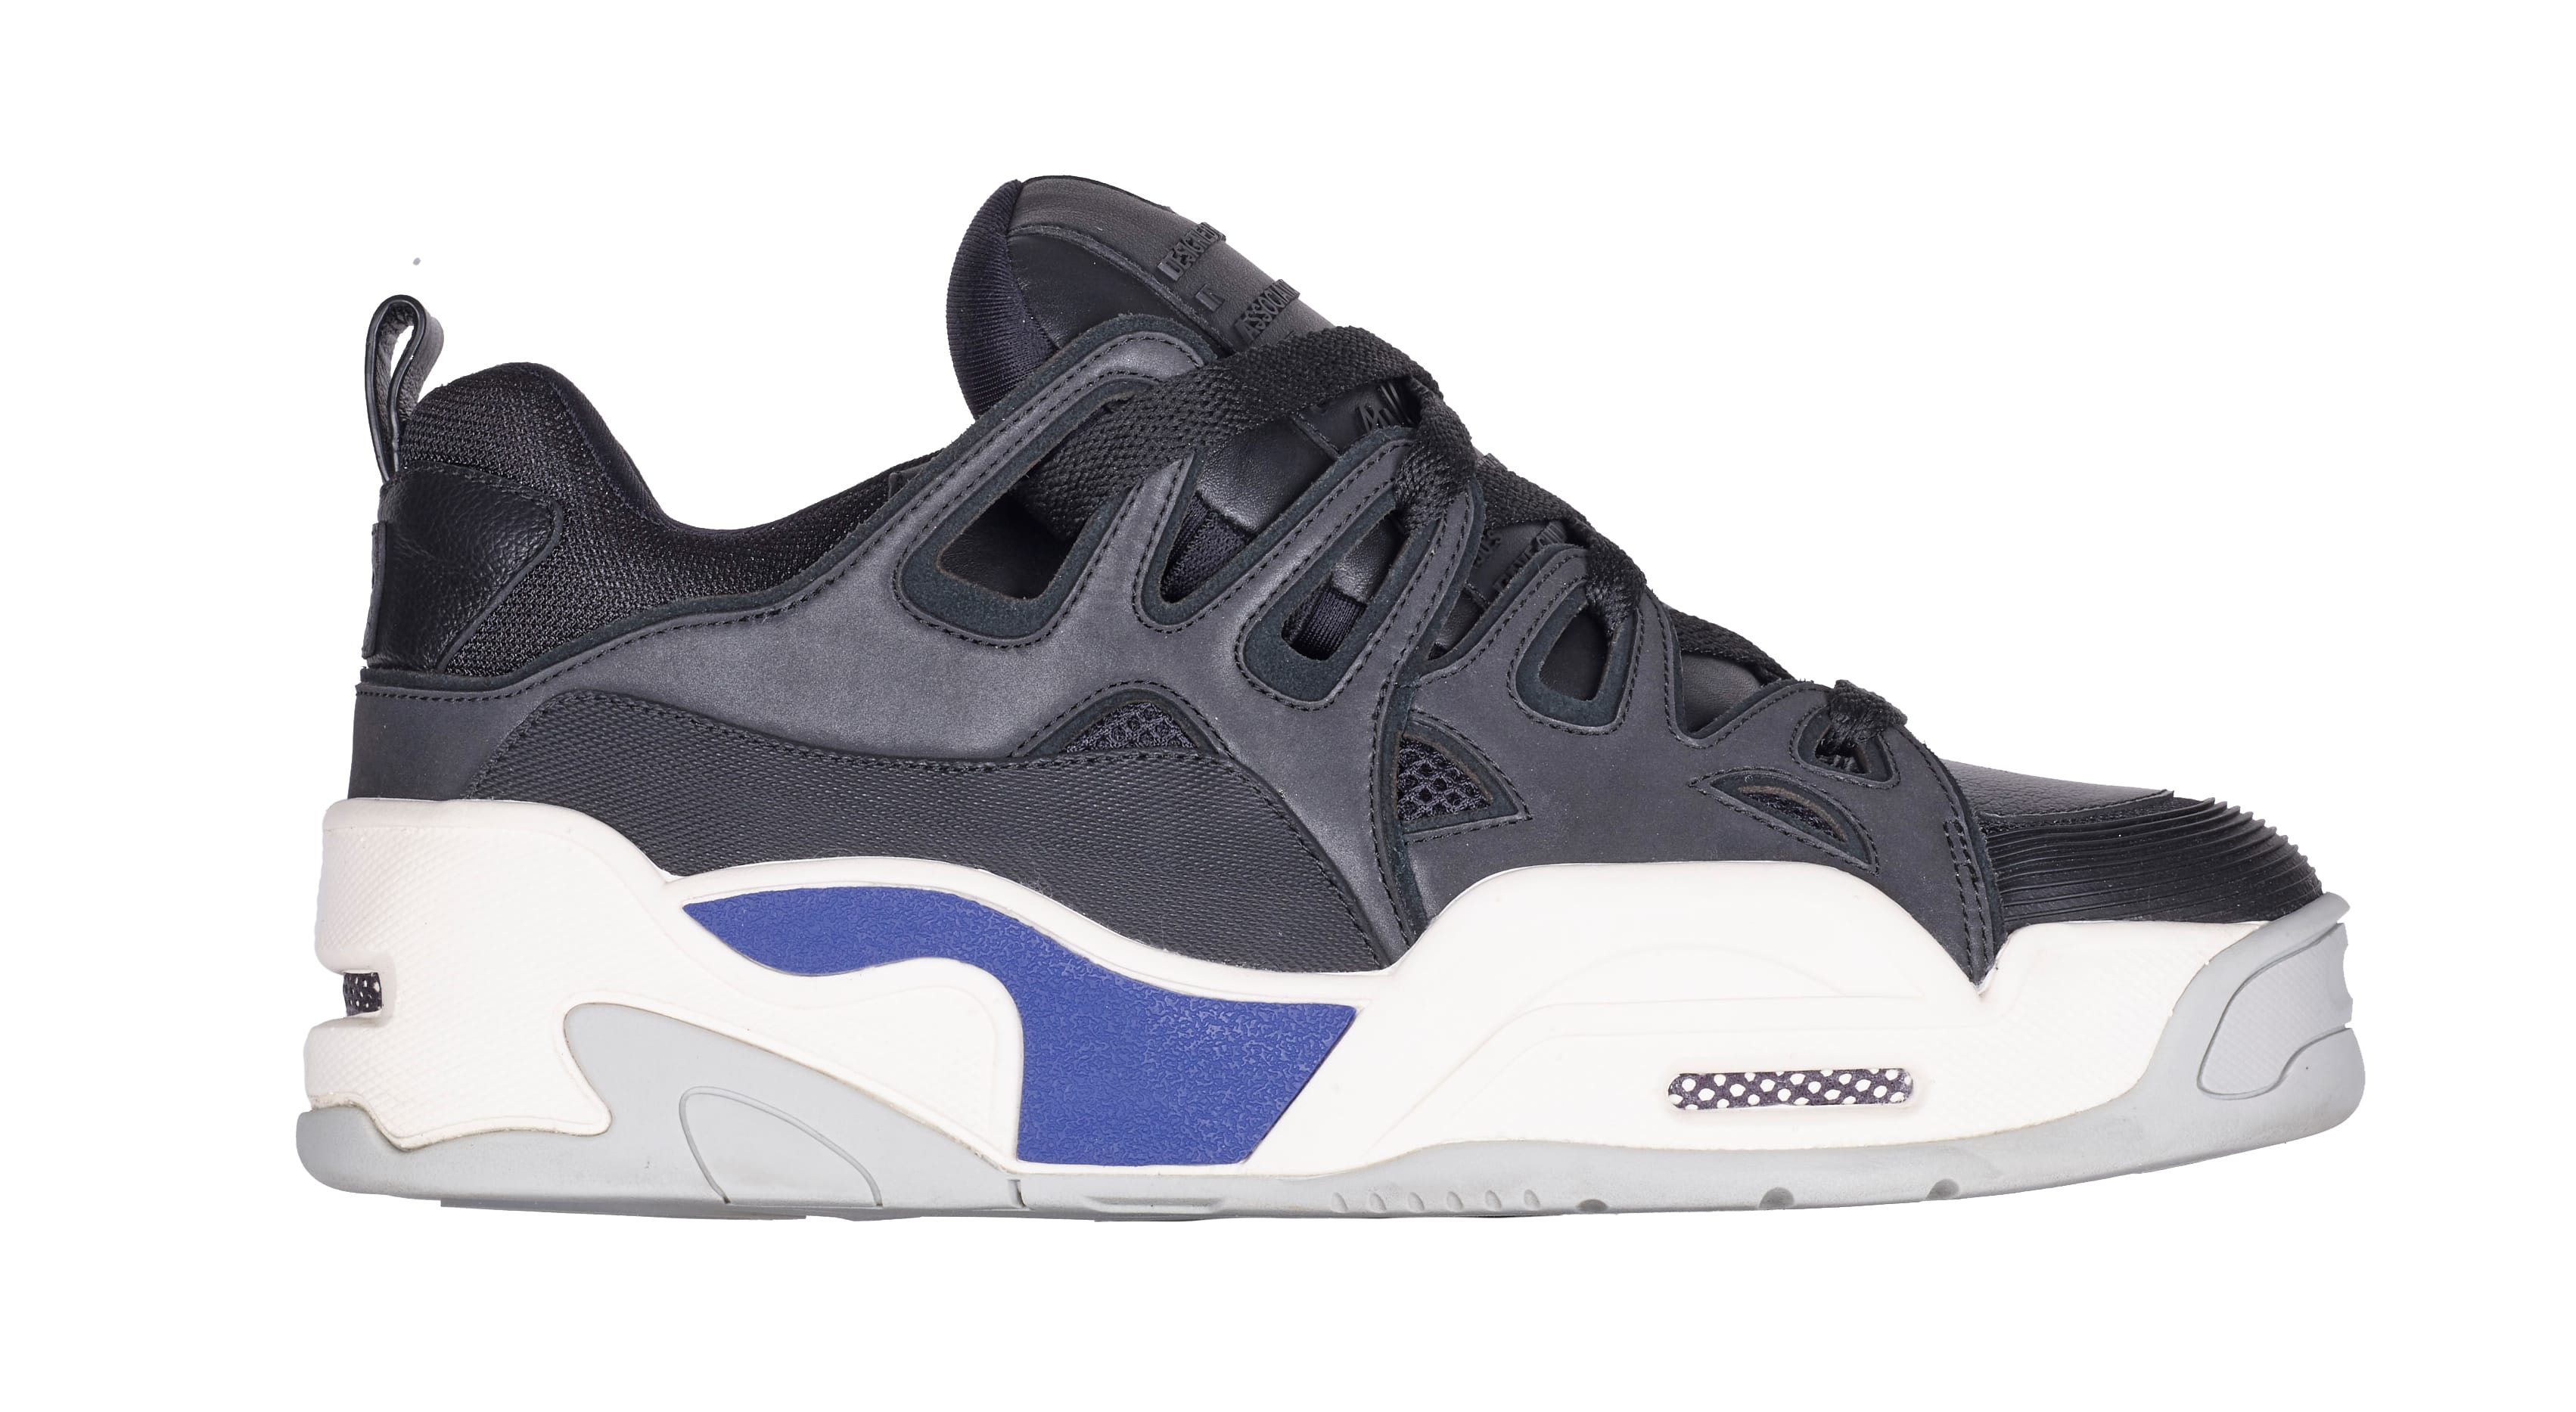 ASAP Rocky x Under Armour SRLo 3021559-003 (Lateral)